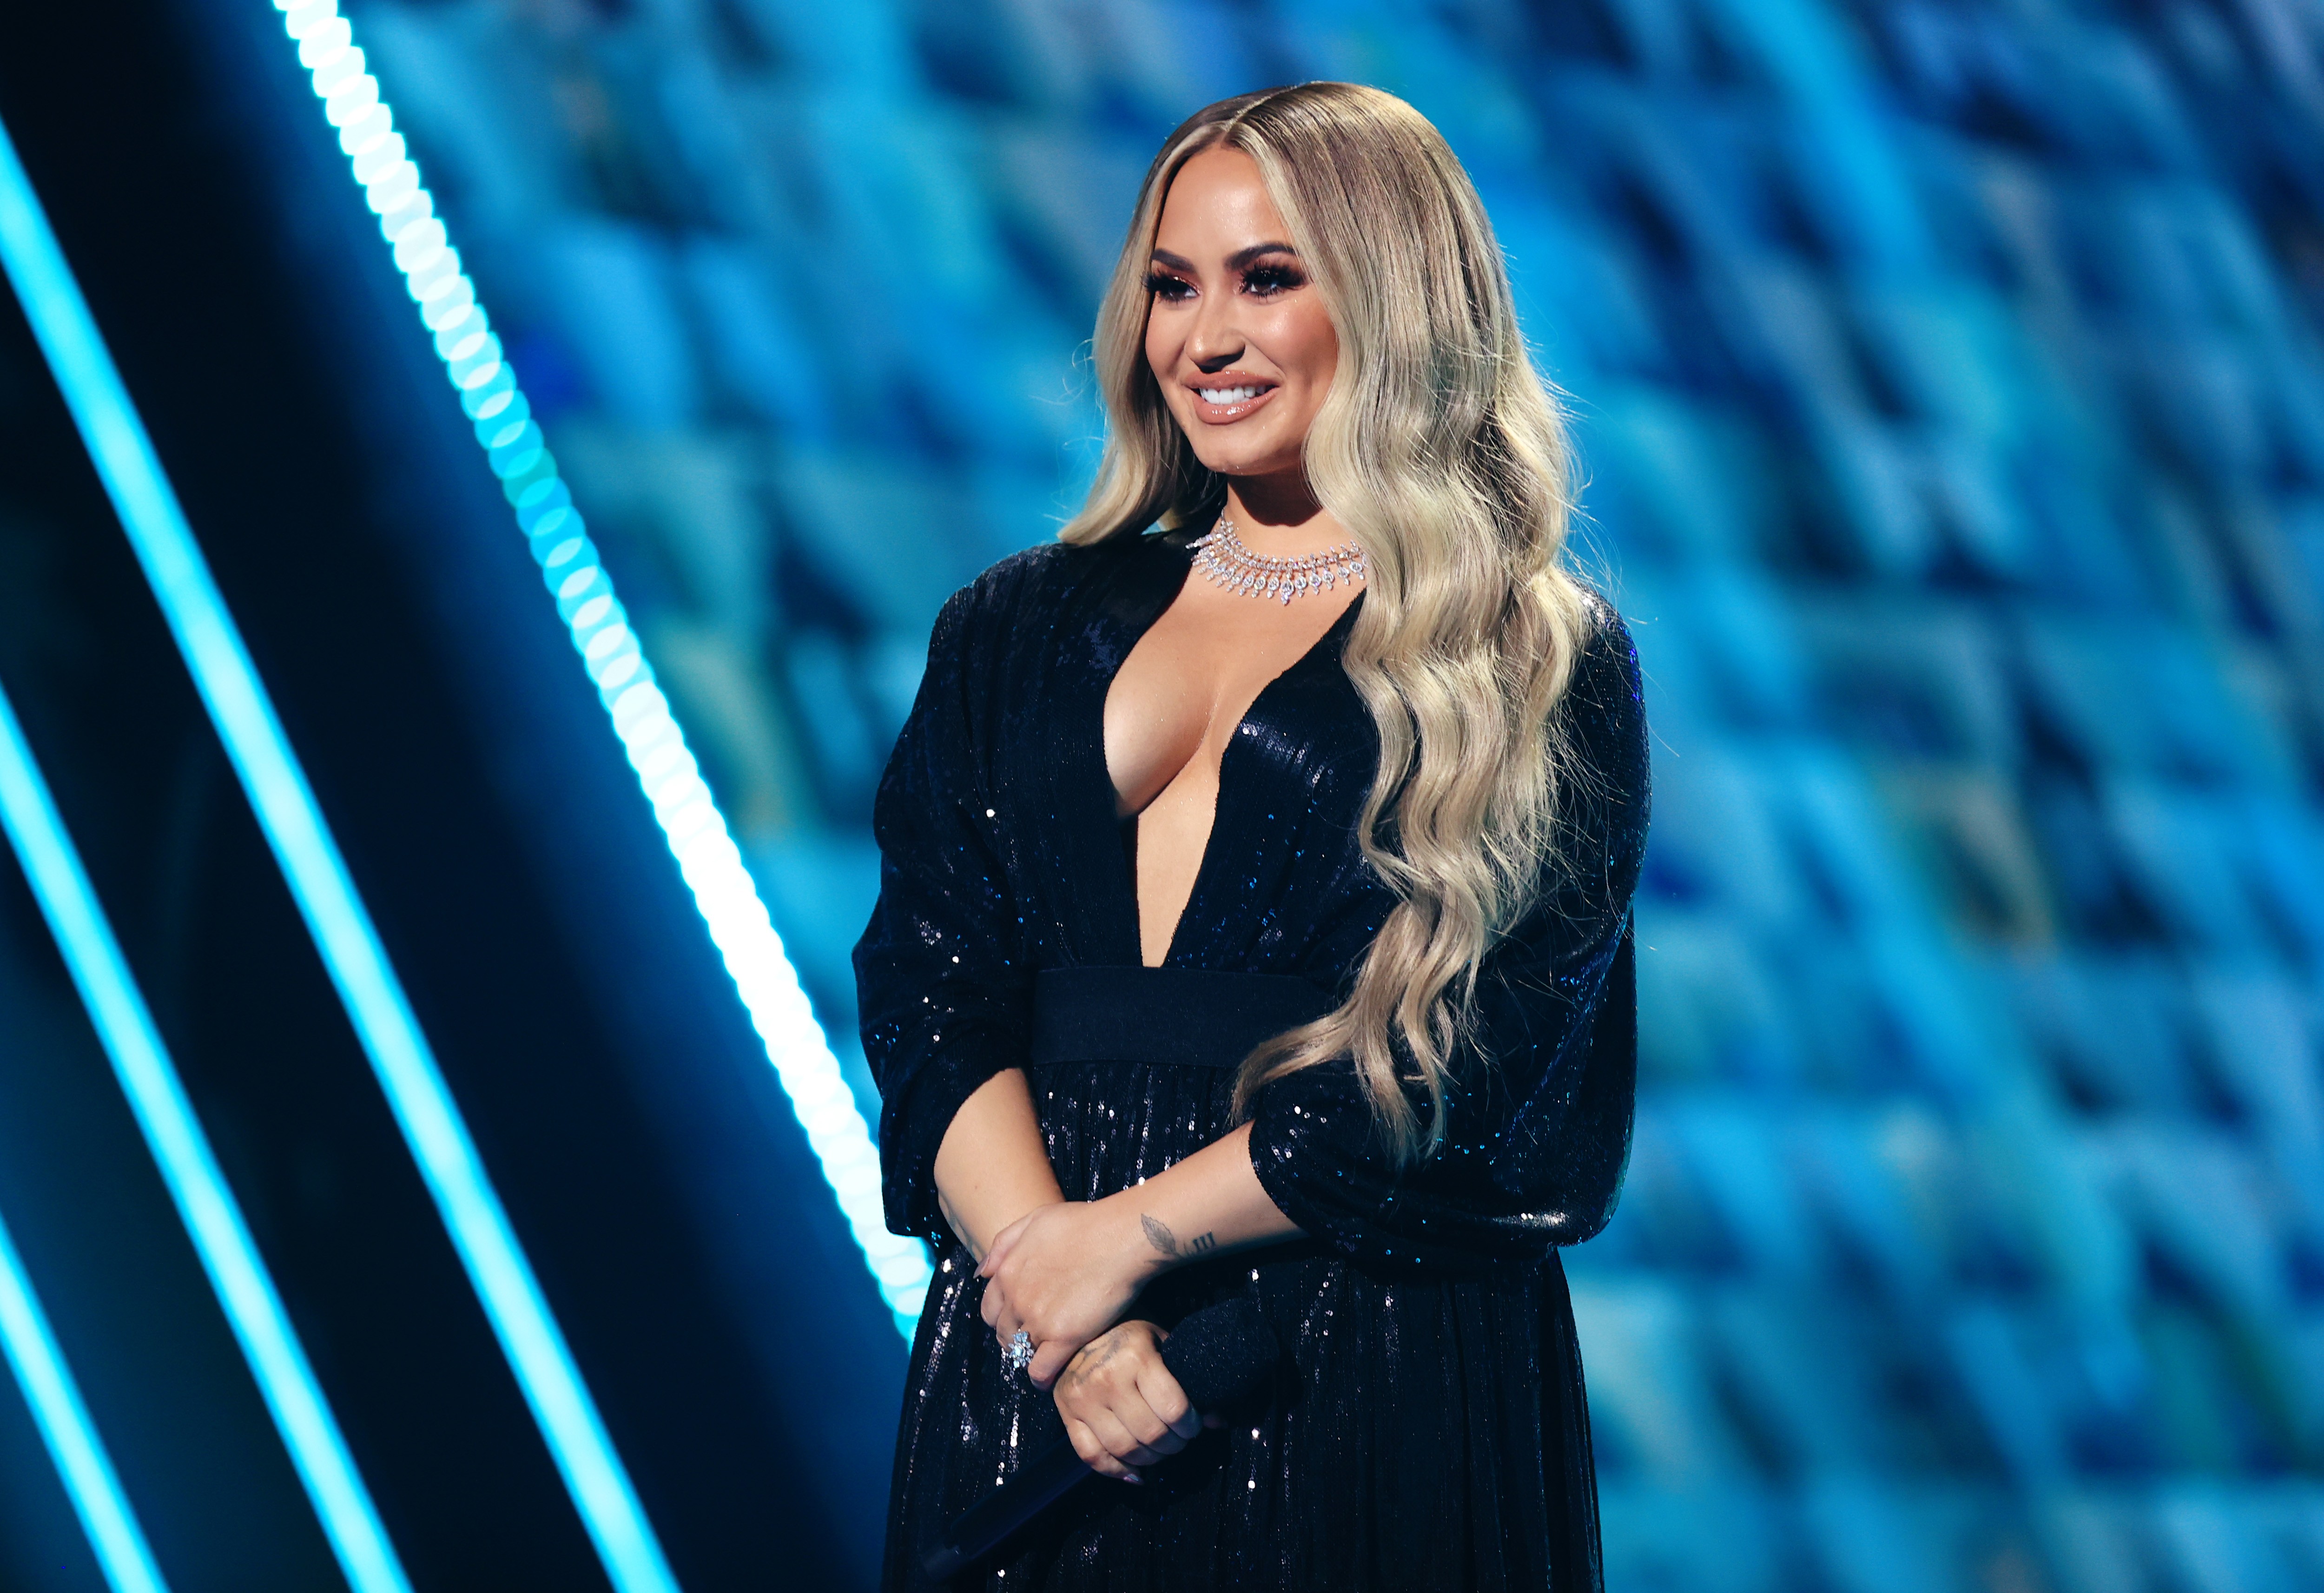 A cantora Demi Lovato no Peoples Choice Awards 2020 (Foto: NBCU Photo Bank via Getty Images)